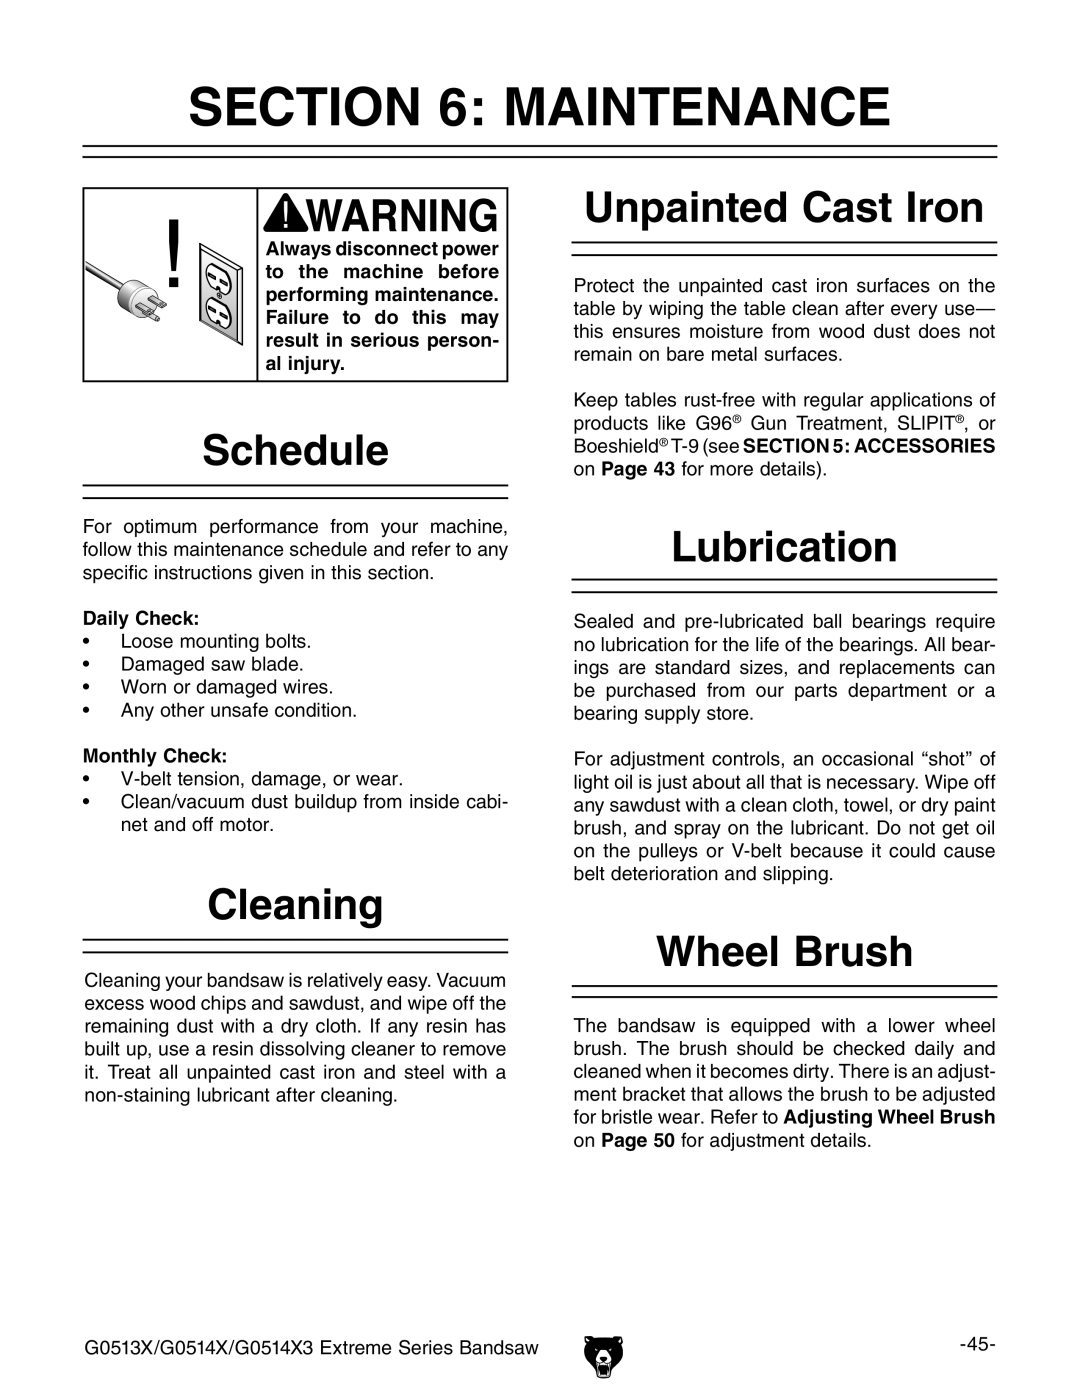 Grizzly G0514X3, G0513X owner manual Maintenance, Schedule, Cleaning, Unpainted Cast Iron, Lubrication, Wheel Brush 